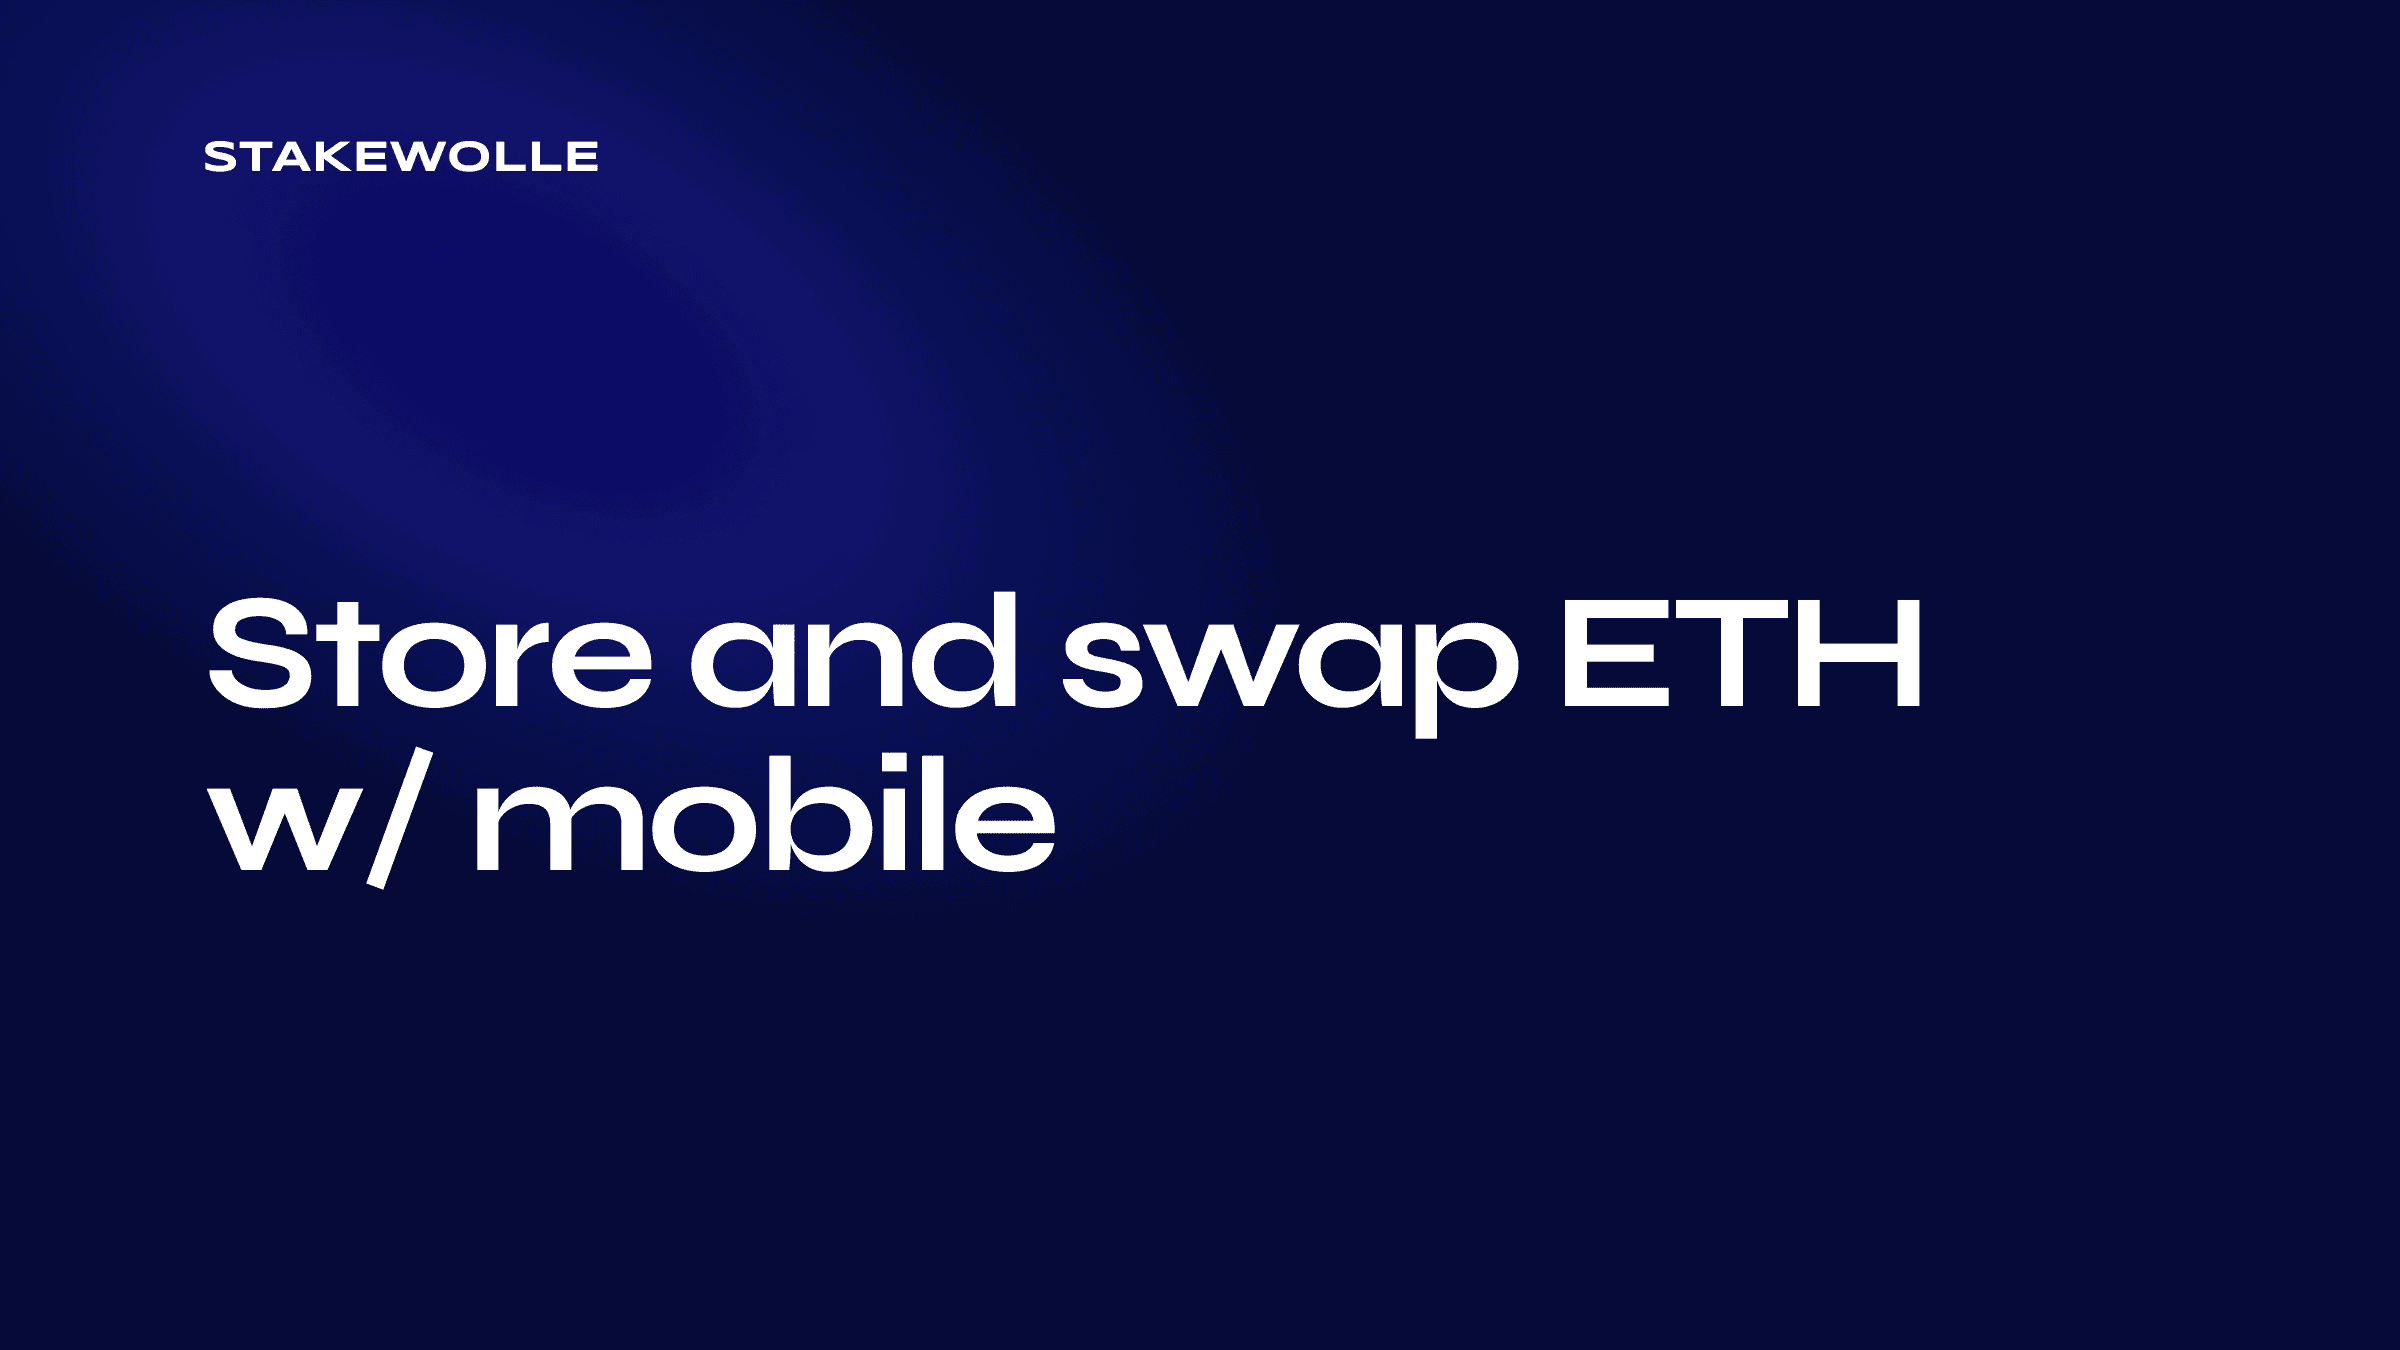 Store and swap ETH w/ mobile